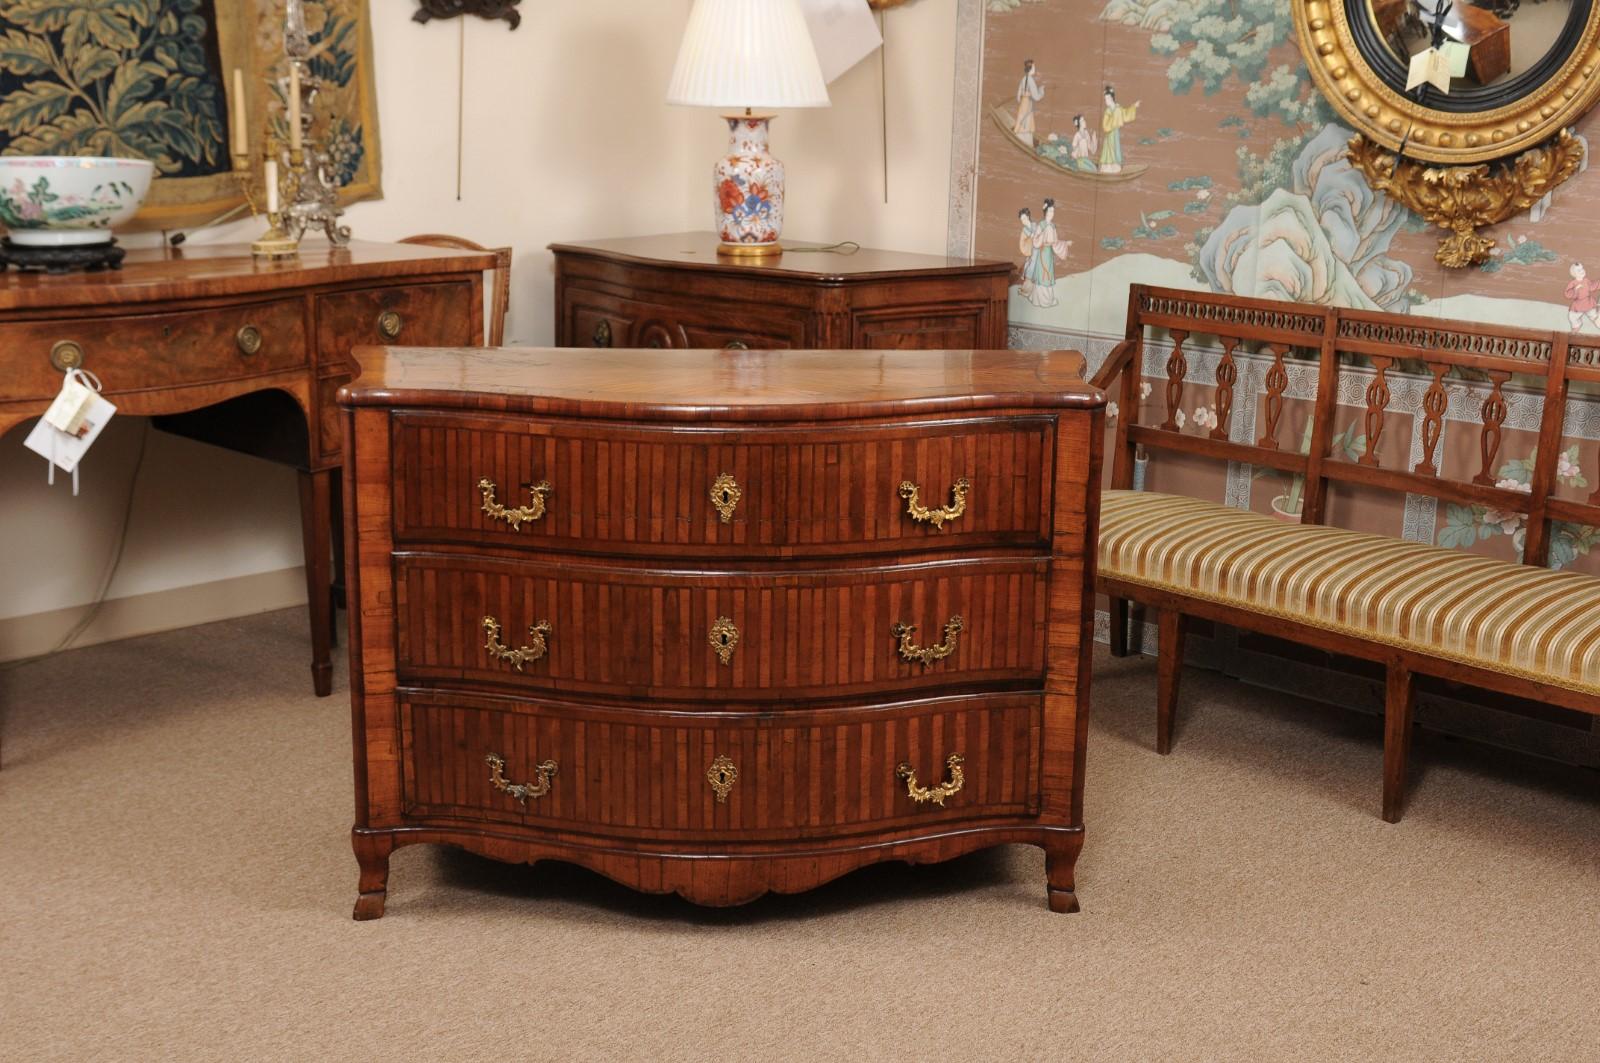  18th Century Continental Parquetry Inlaid Commode with Serpentine Front For Sale 2